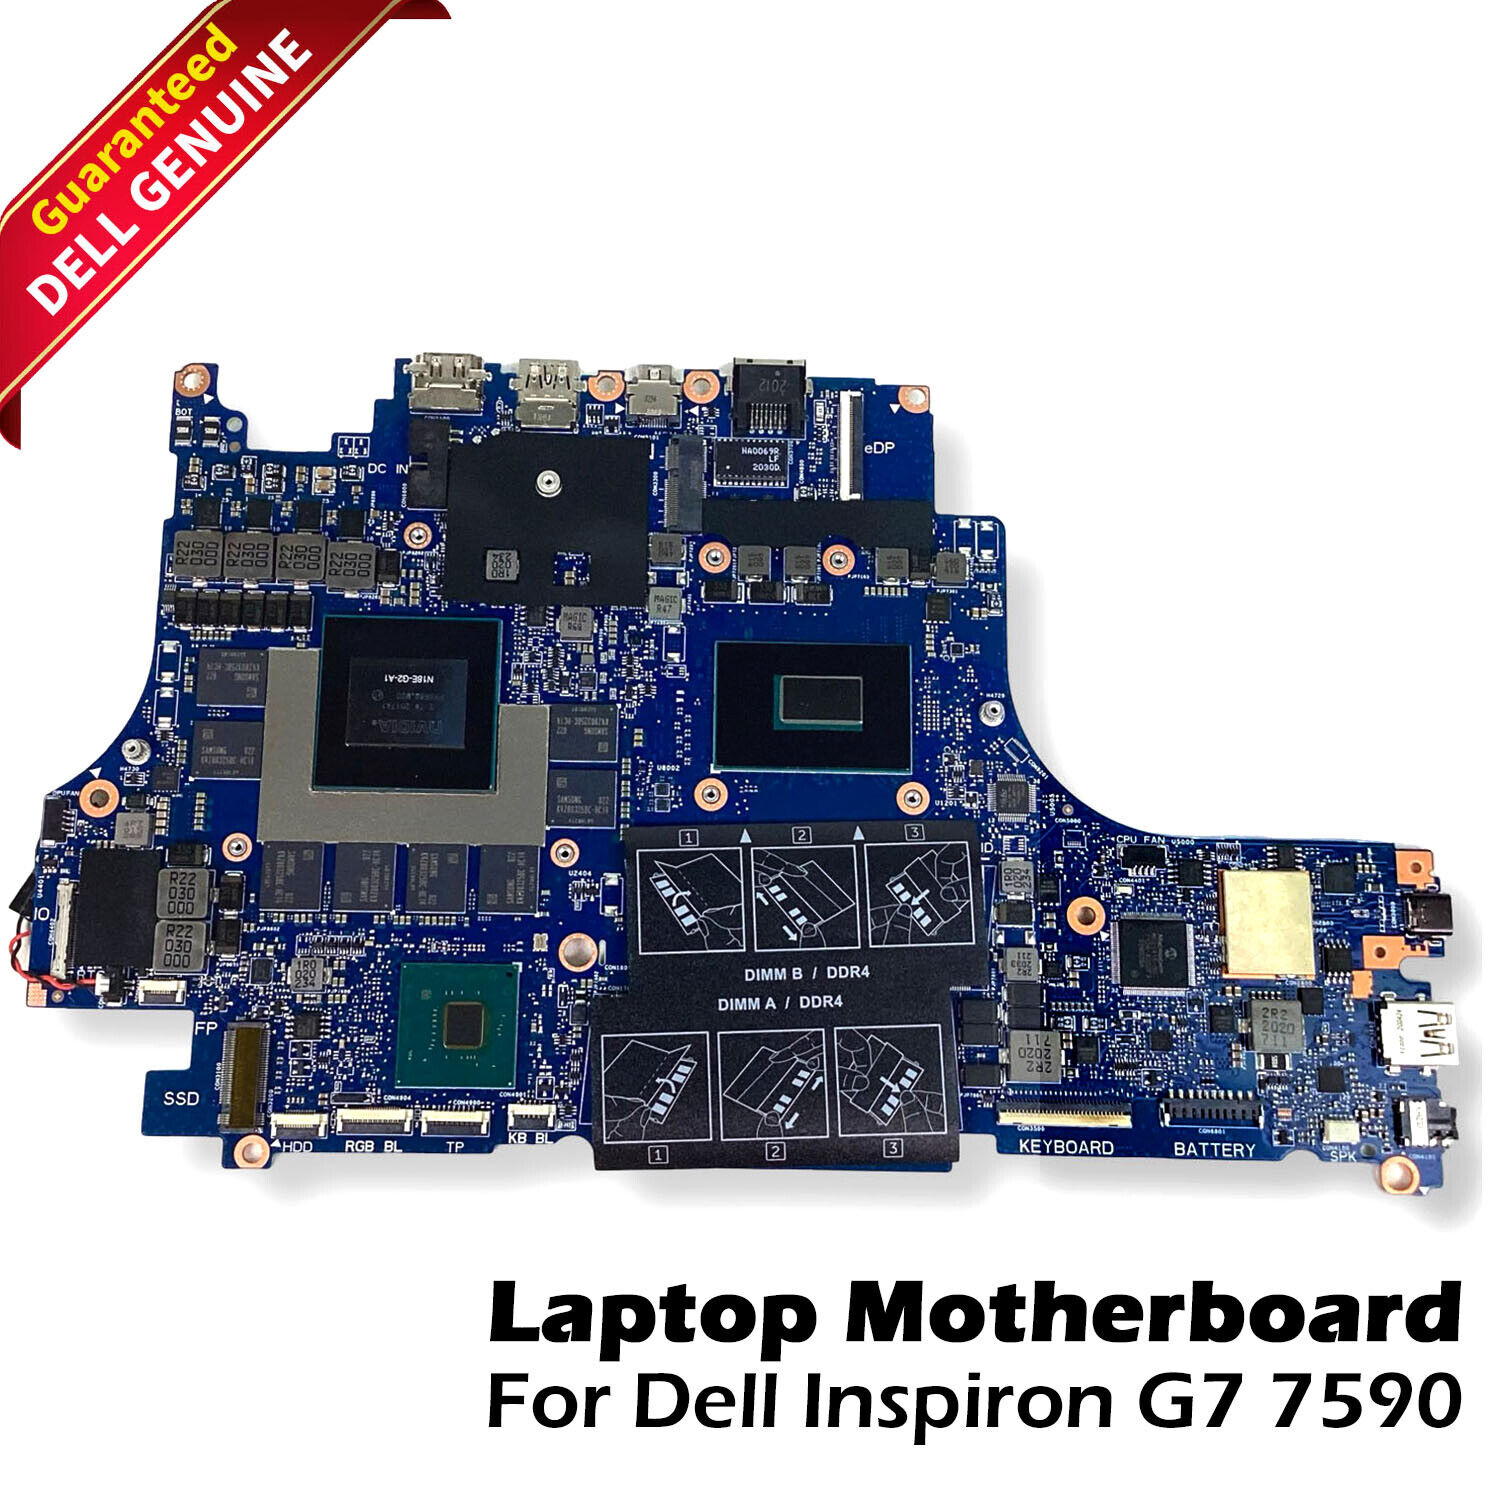 Genuine Dell Inspiron G7 7590 Motherboard i7-9750H 4.5GHz RTX 2070 8GB D2DM3